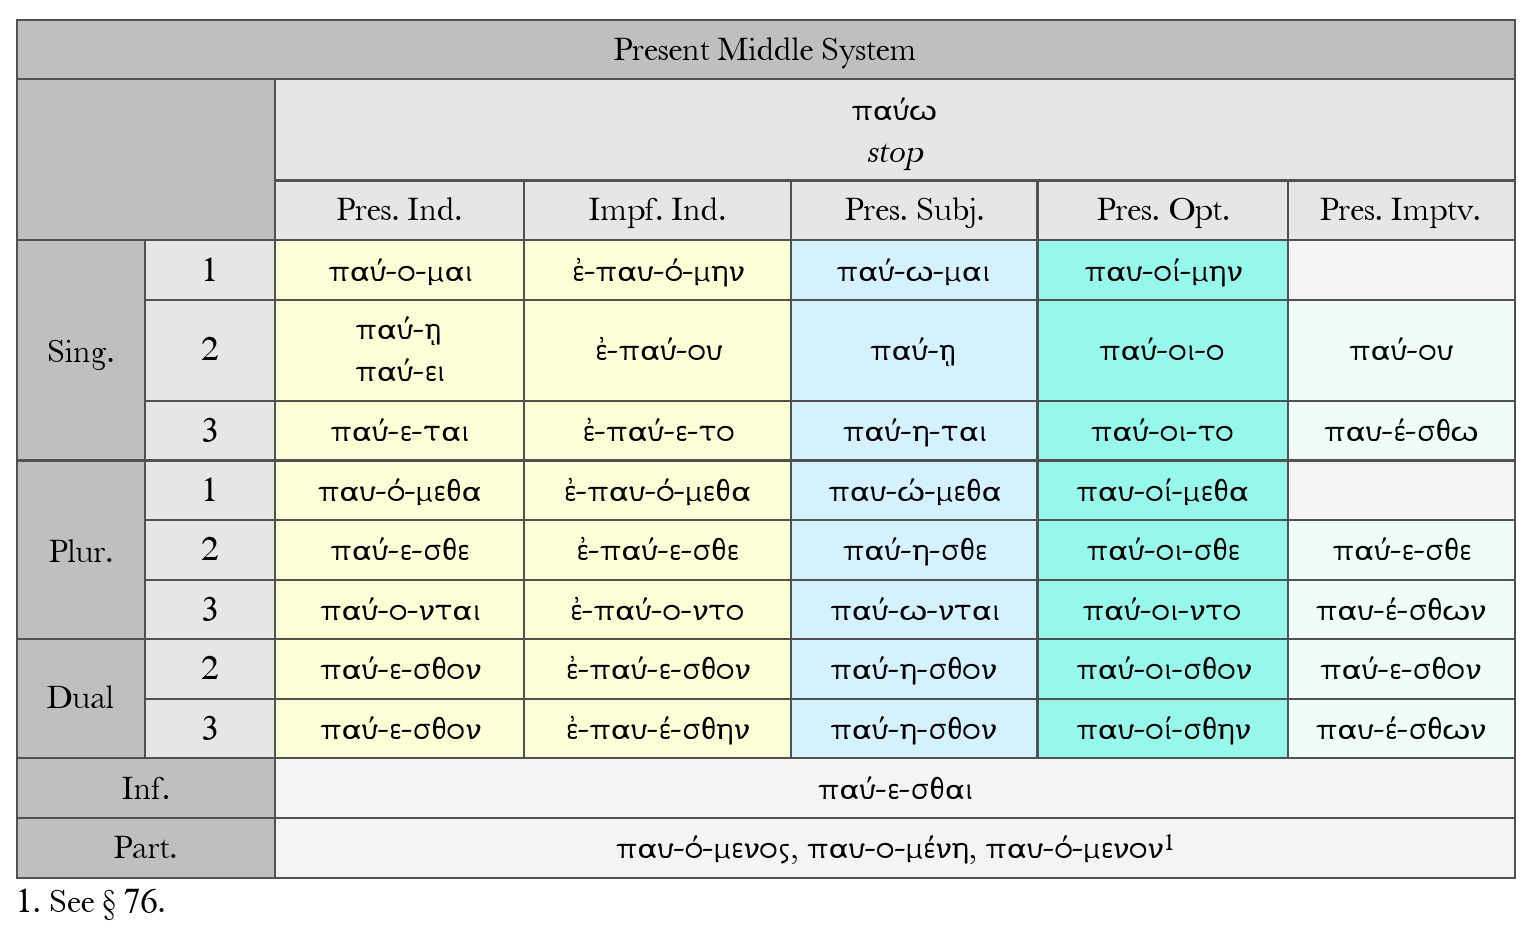 Goodell: Present Middle System Paradigm Chart παύω